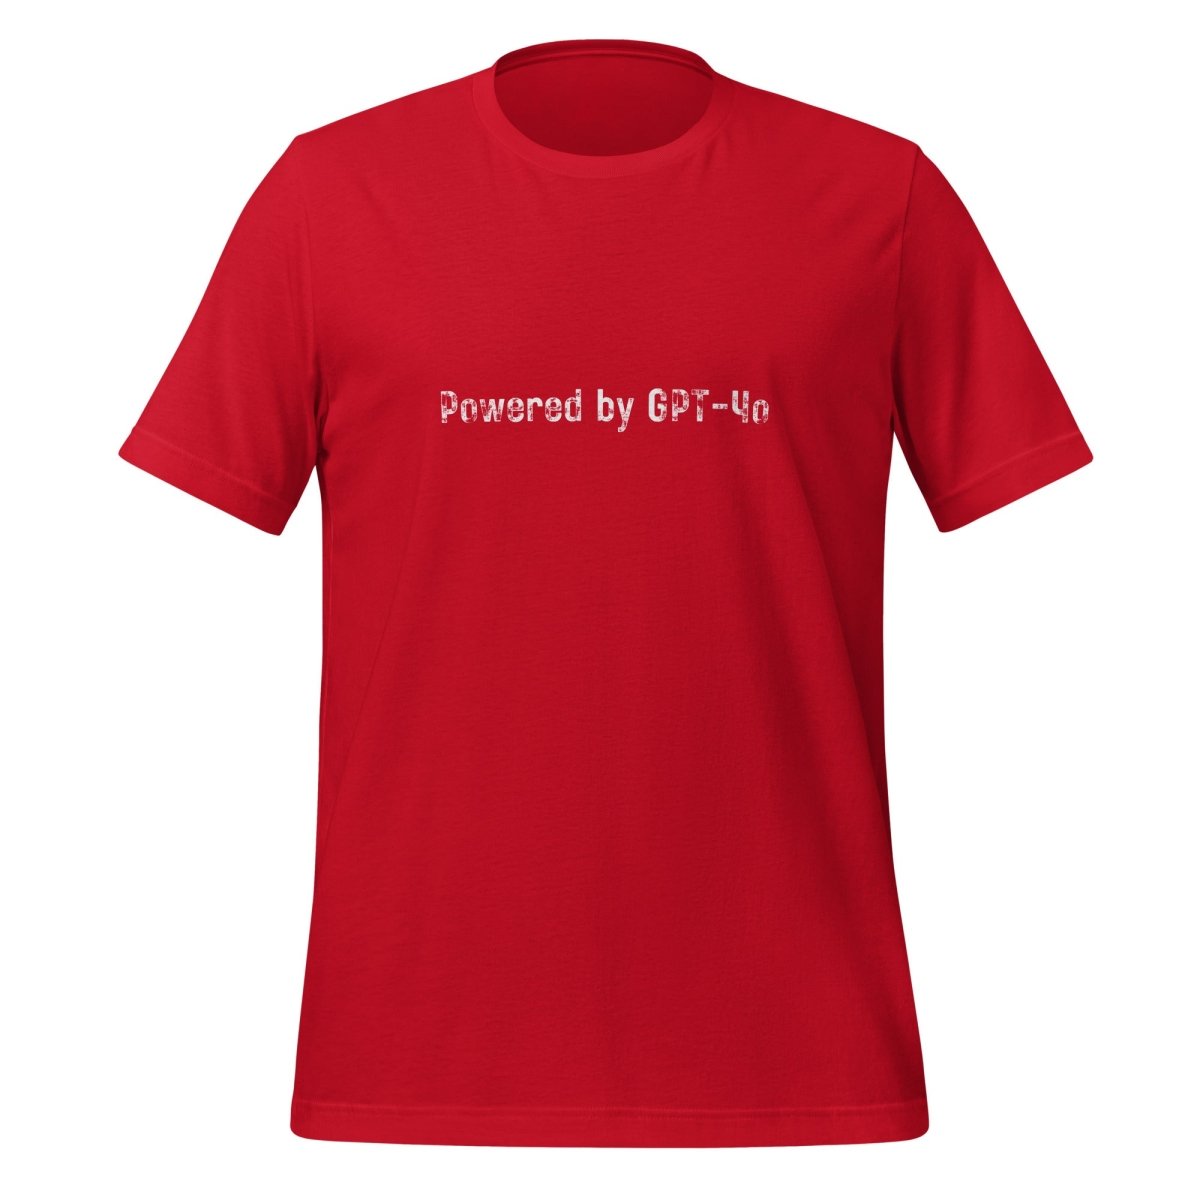 Powered by GPT - 4o T - Shirt 2 (unisex) - Red - AI Store